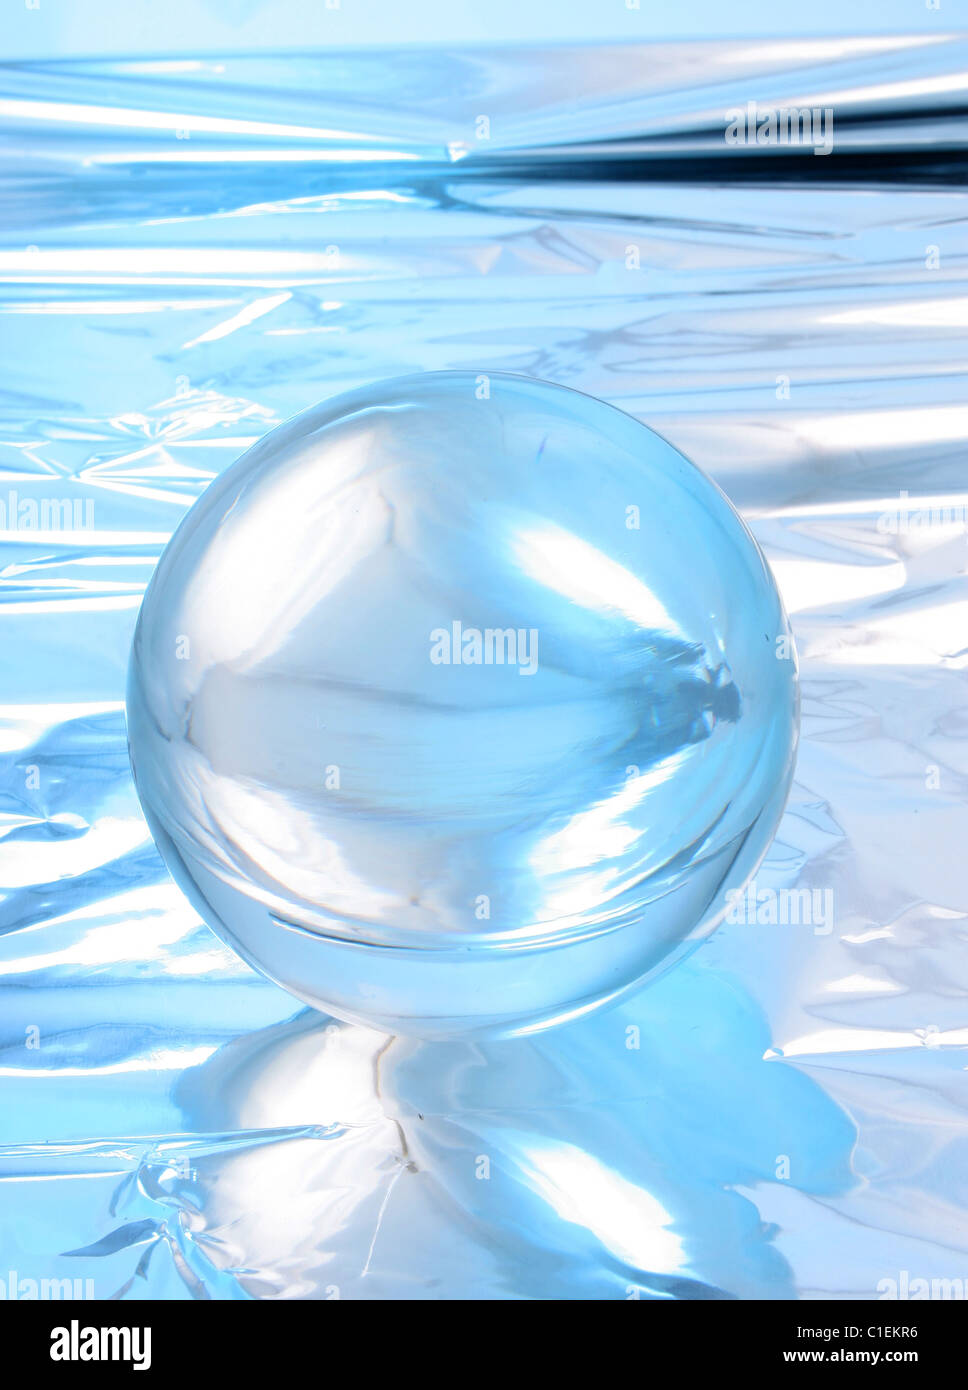 Blue crystal ball abstract background Stock Photo